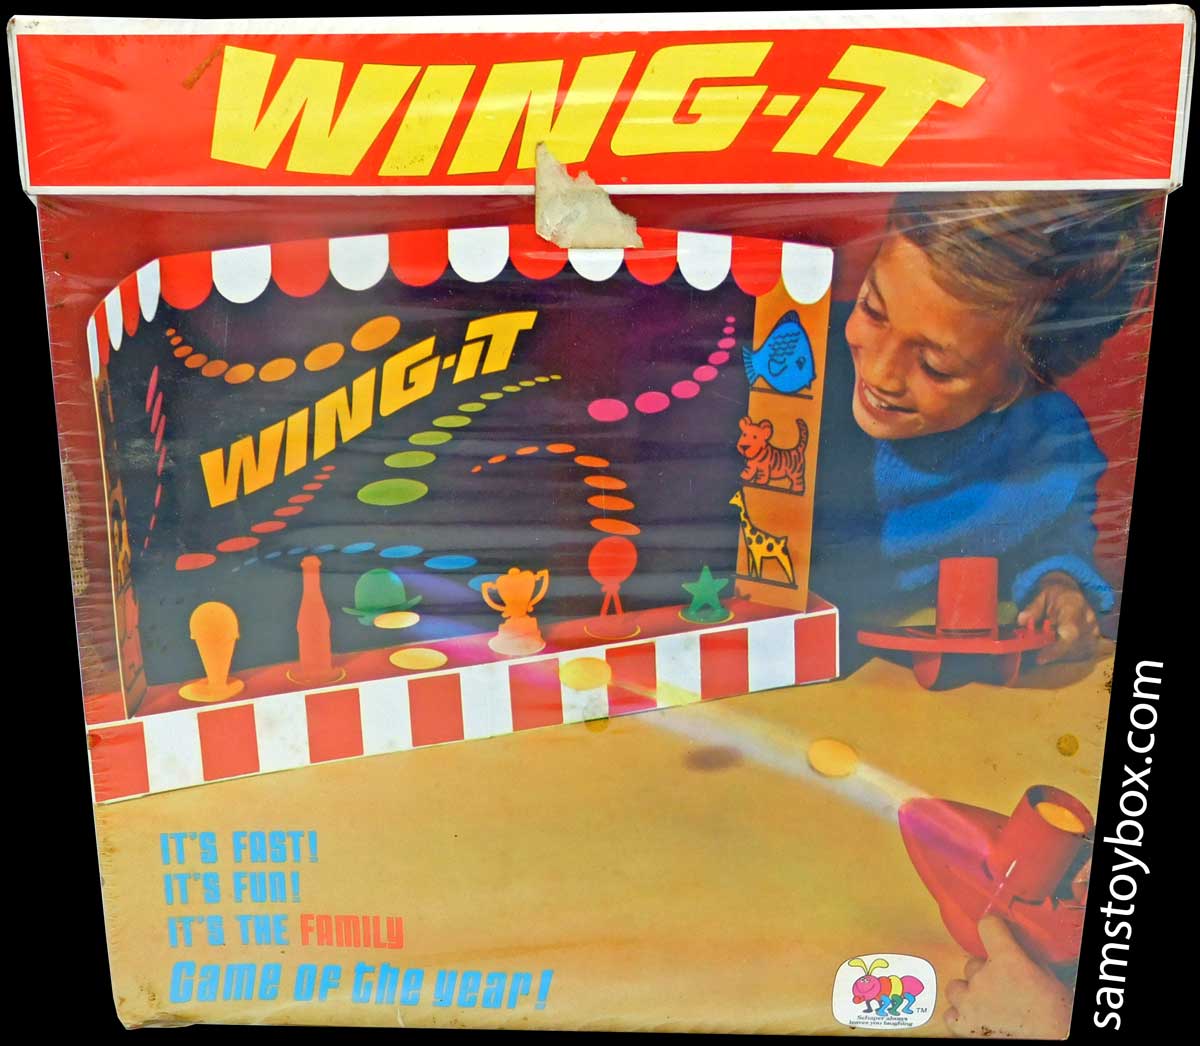 Wing-It Game by Schaper, Box Front